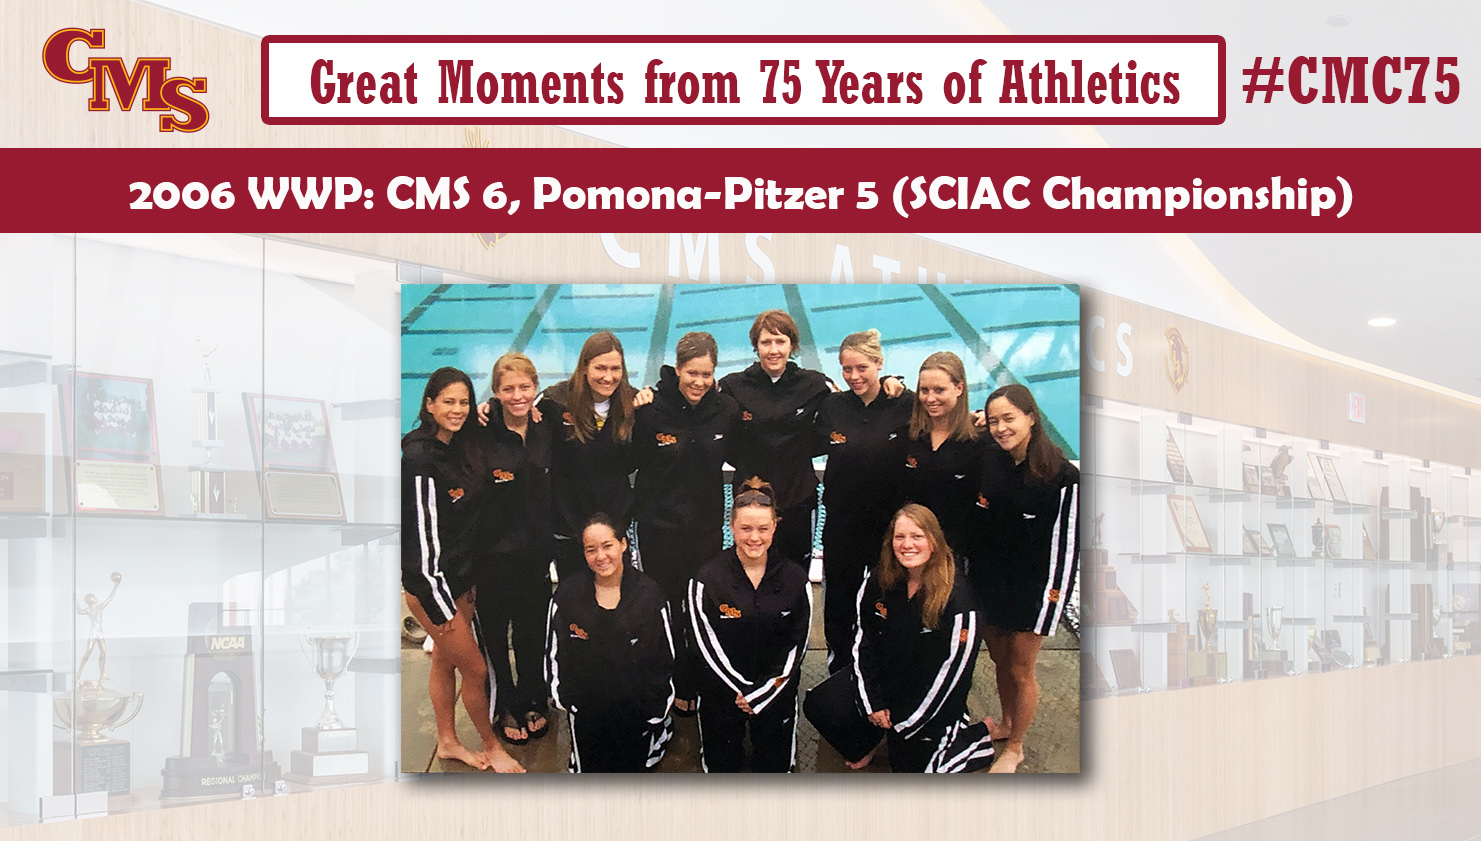 The 2006 Women's Water Polo team. Words over the photo read: Great Moments from 75 Years of Athletics. 2006 WWP: CMS 6, Pomona-Pitzer 5 (SCIAC Championship)